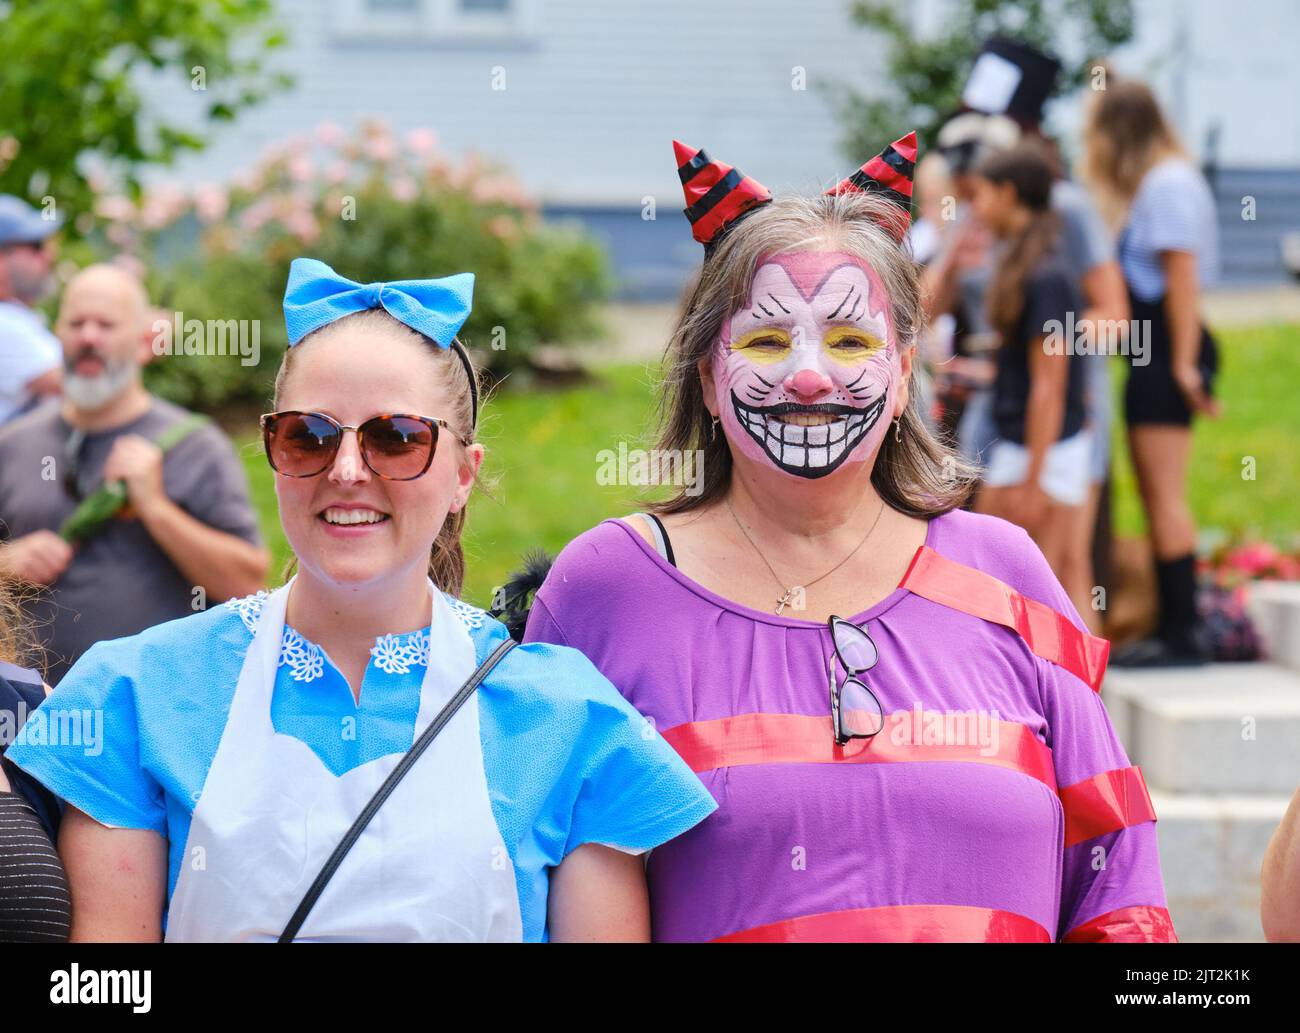 Halifax, Nova Scotia, Canada. August 27th, 2022. Alice and the Cheshire Cat still smiling as their team sets off through the streets of Halifax in search of the next clue in the Alice in Wonderland adventure. For one day only, the streets of Halifax are transformed into a giant, escape-room-style experience to find Alice in the App based adventure game. Credit: meanderingemu/Alamy Live News Stock Photo